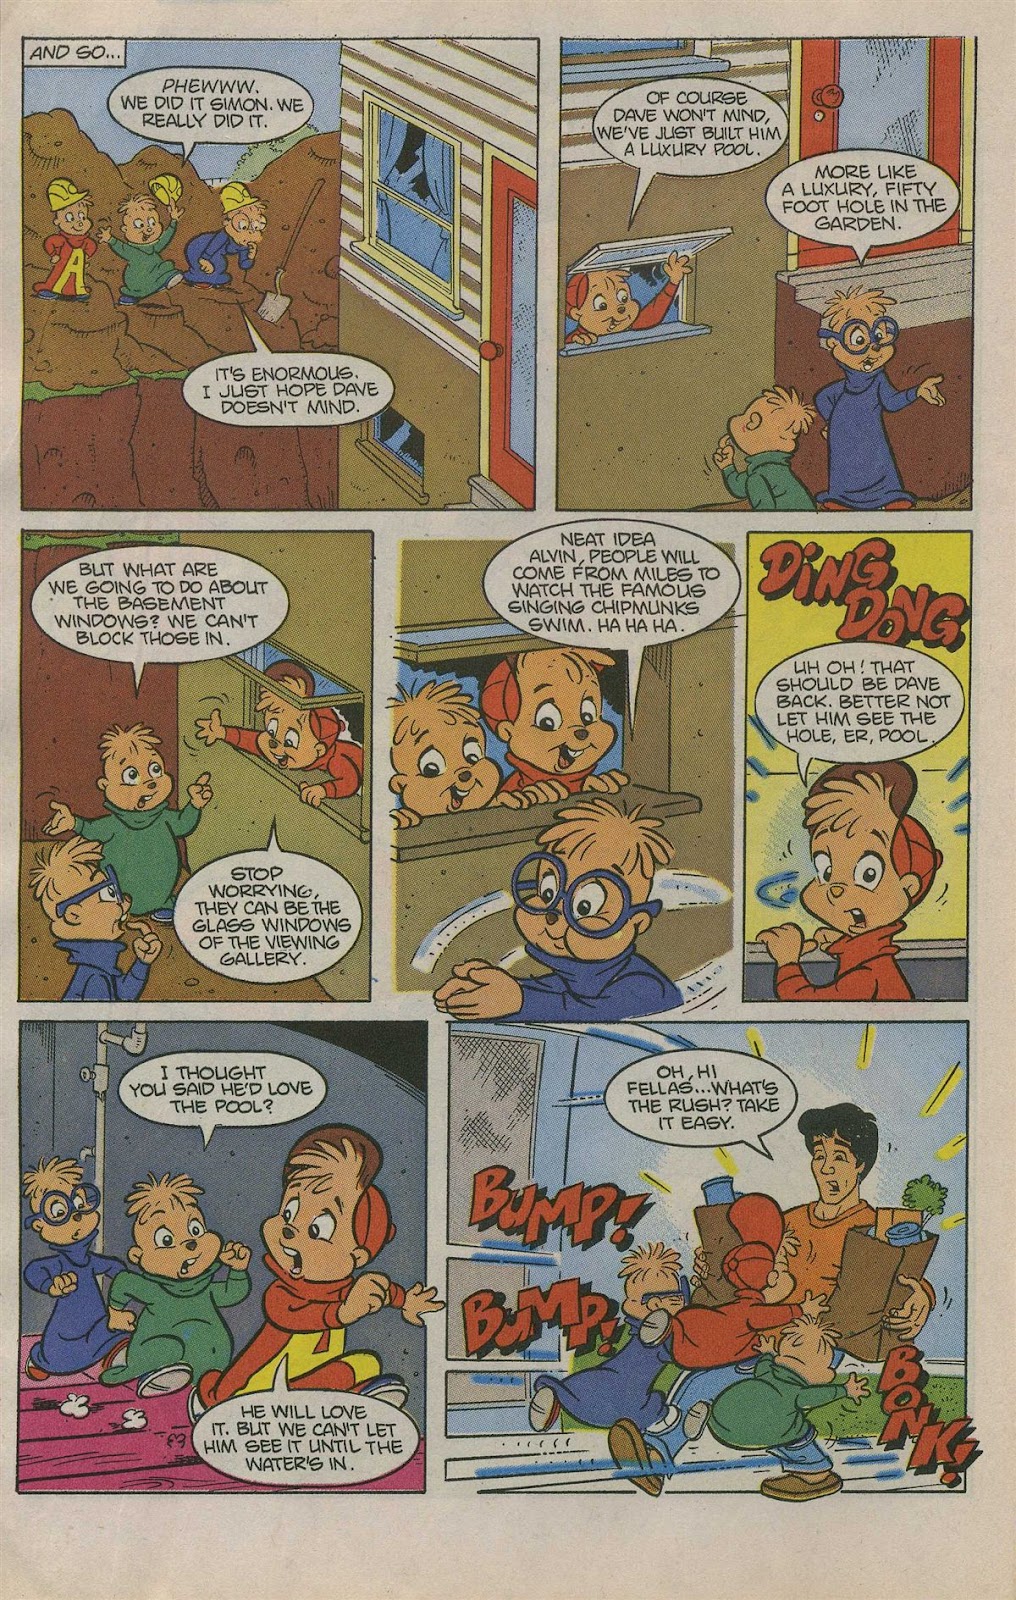 Alvin And The Chipmunks Porn Foot - Alvin And The Chipmunks 1 | Read Alvin And The Chipmunks 1 comic online in  high quality. Read Full Comic online for free - Read comics online in high  quality .|viewcomiconline.com